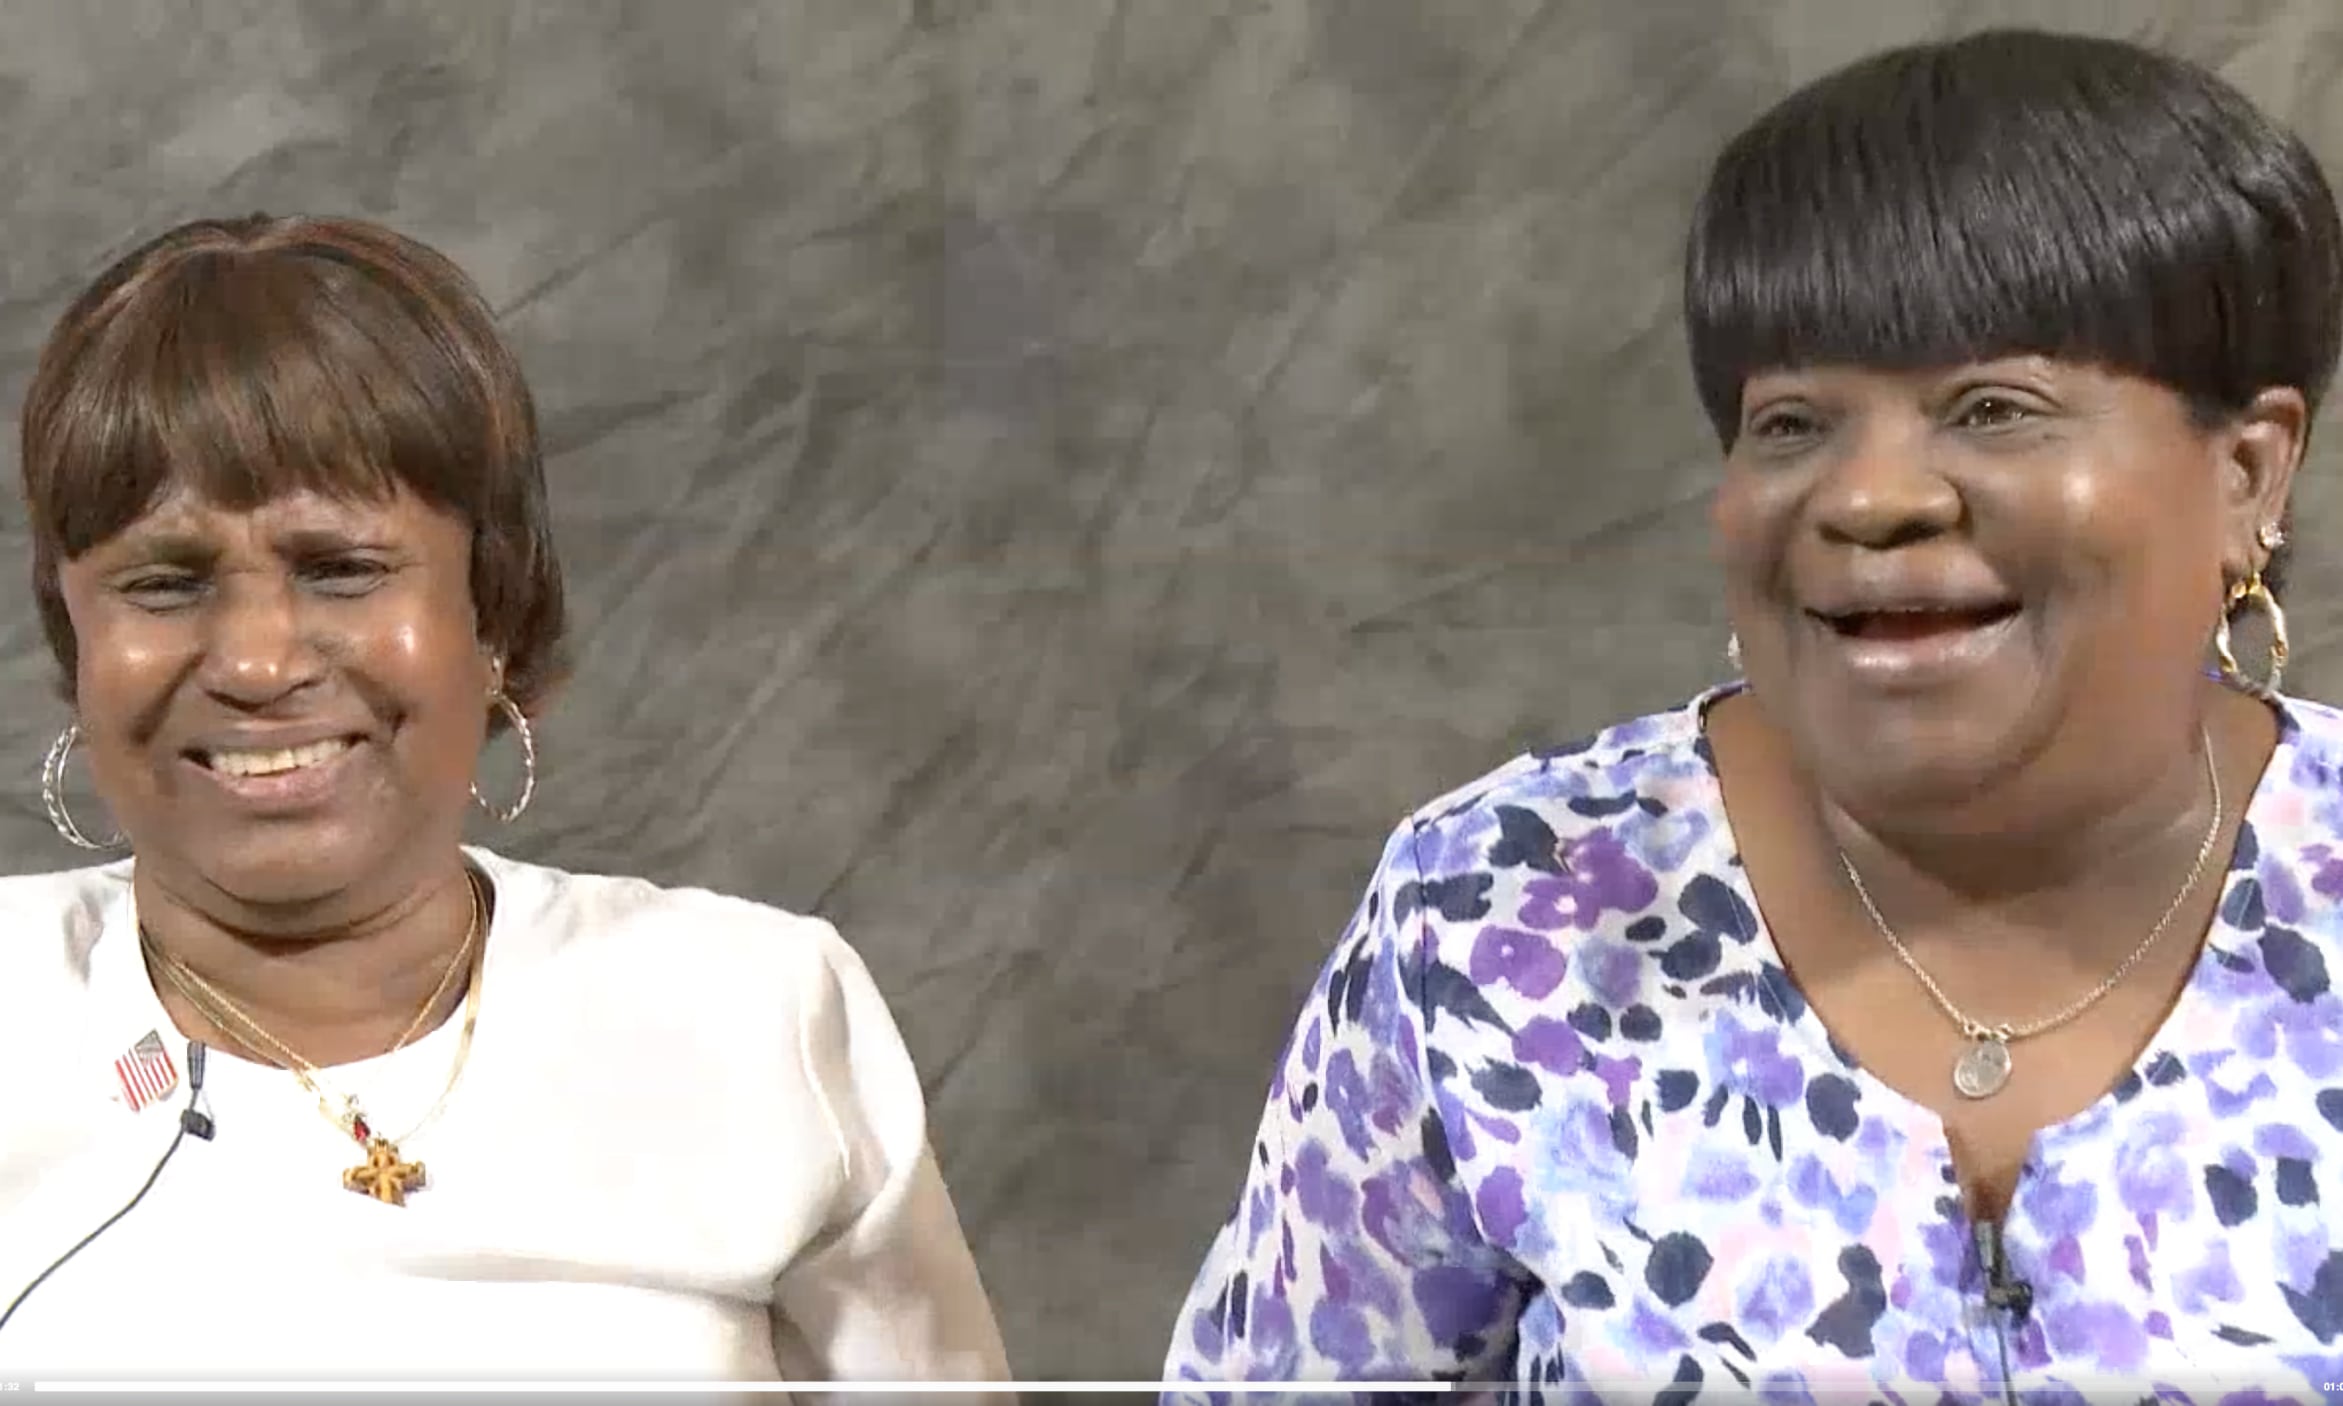 Shoulders up, Audrey Nell Hamilton and JoAnn Anderson Ulmer (older Black women) laugh in front of a grey backdrop.